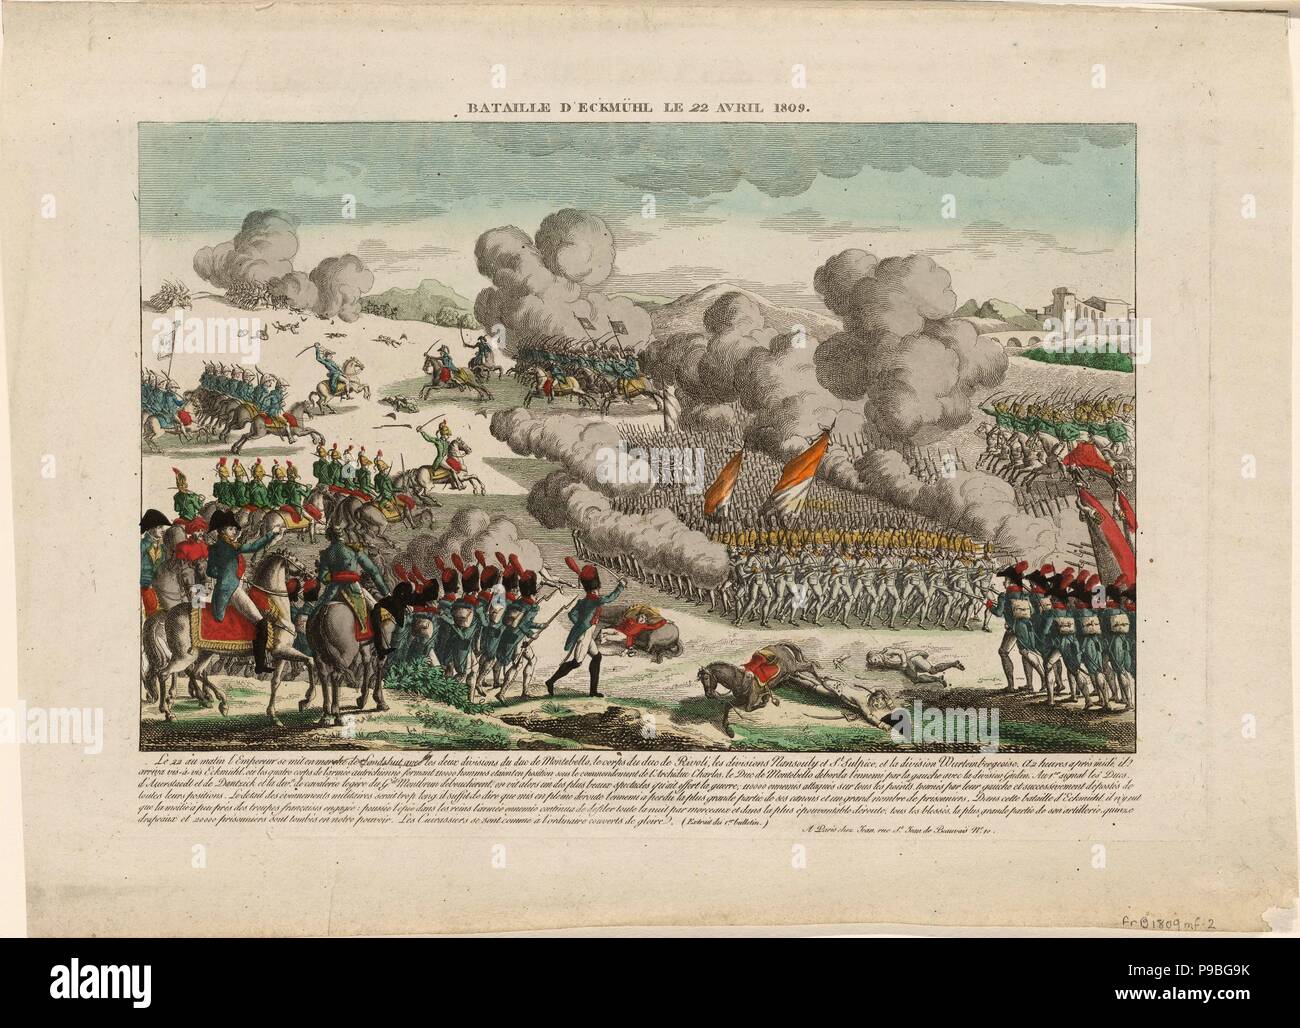 The Battle of Eggmühl on 22 April 1809. Museum: PRIVATE COLLECTION. Stock Photo